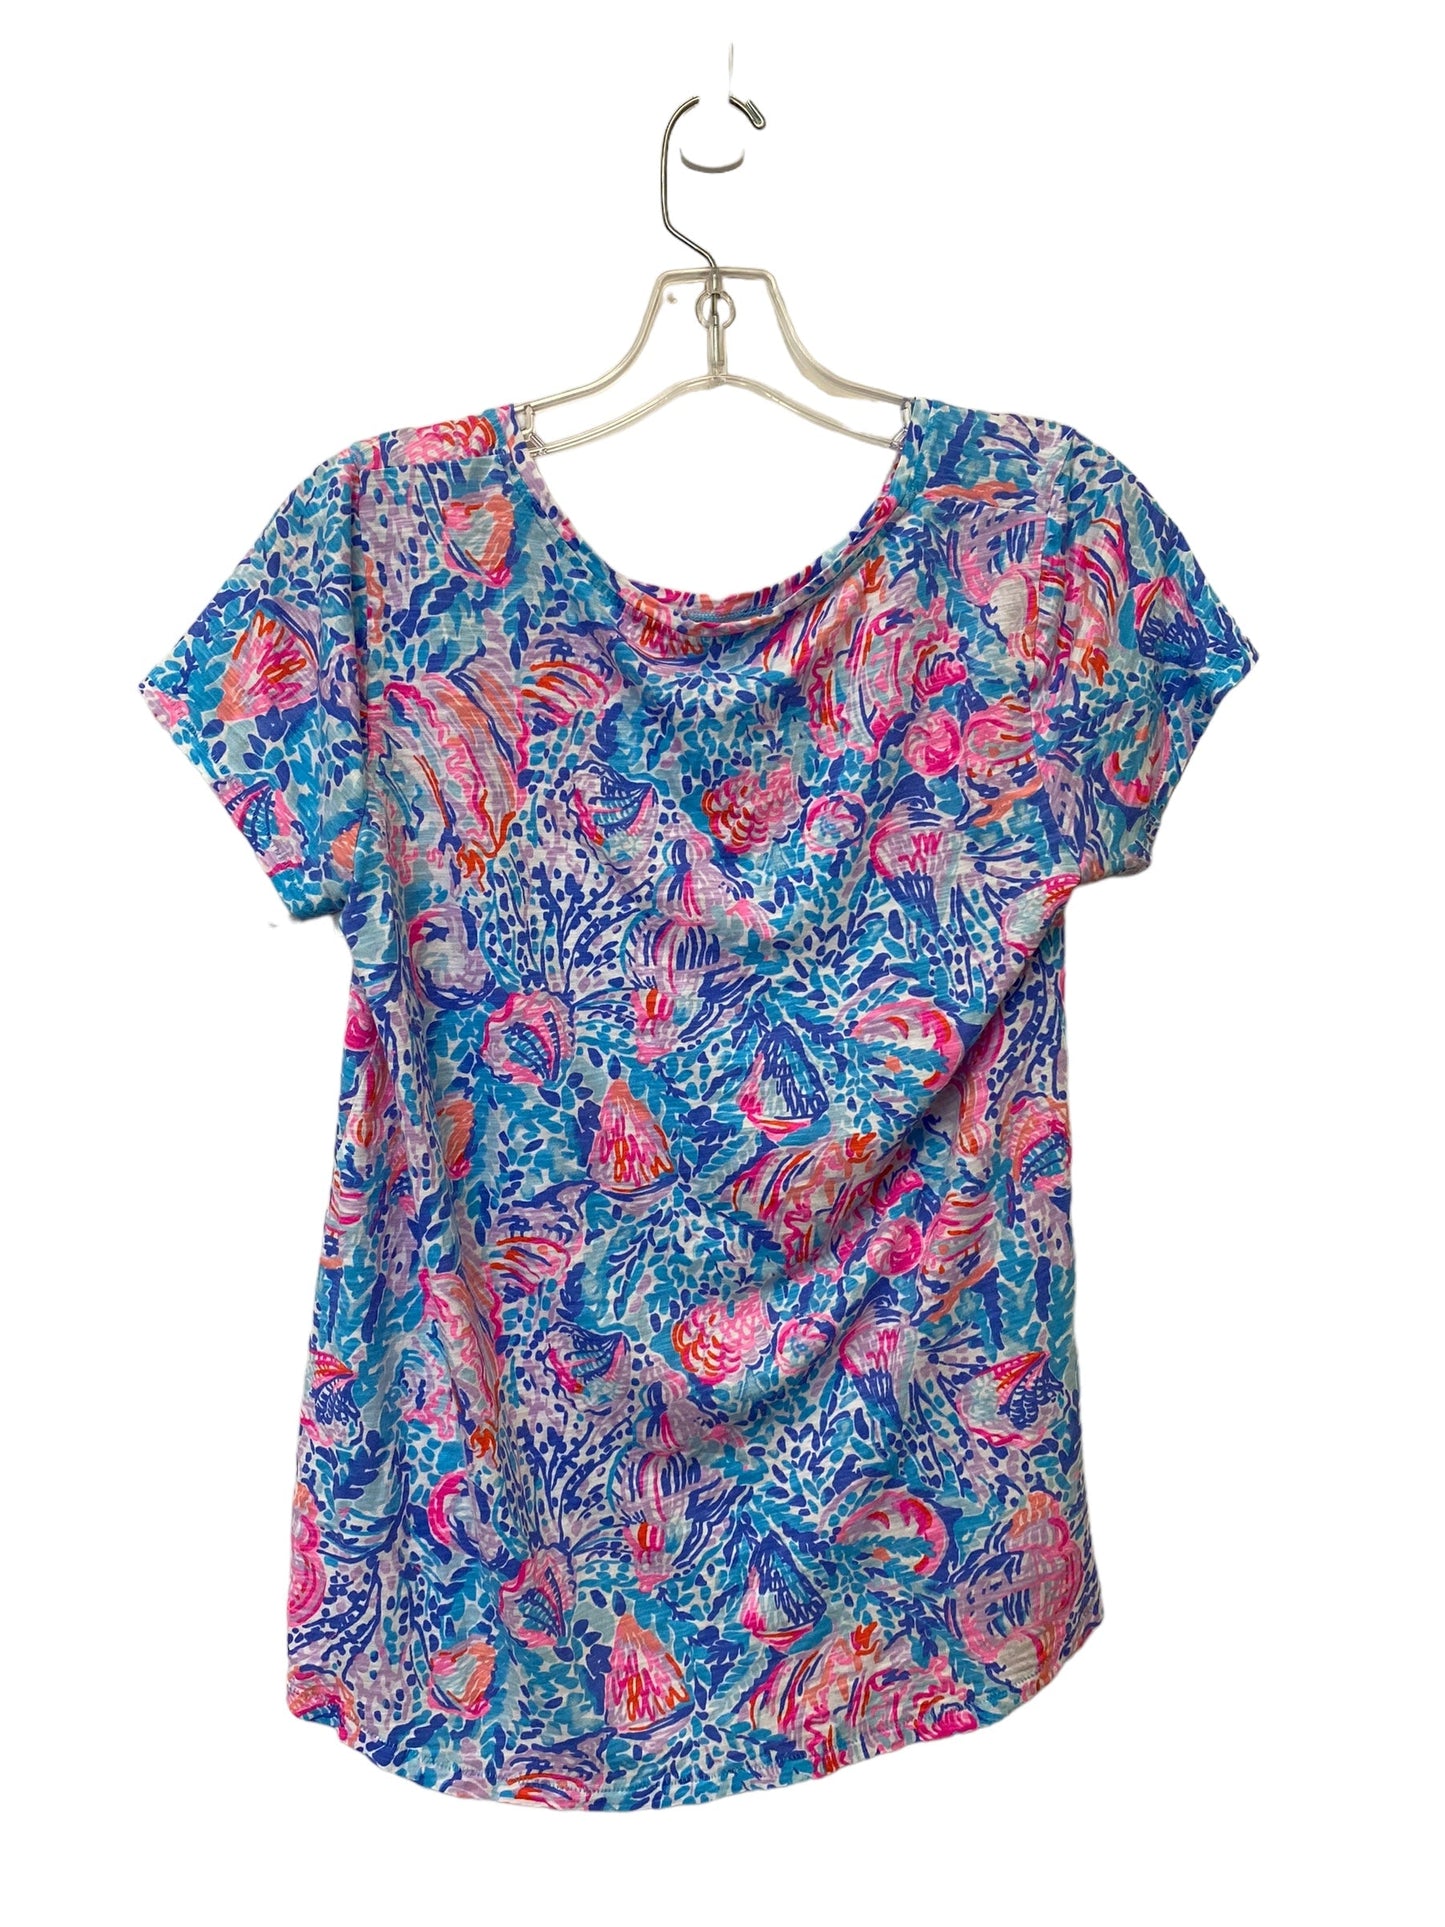 Blue Top Short Sleeve Lilly Pulitzer, Size M